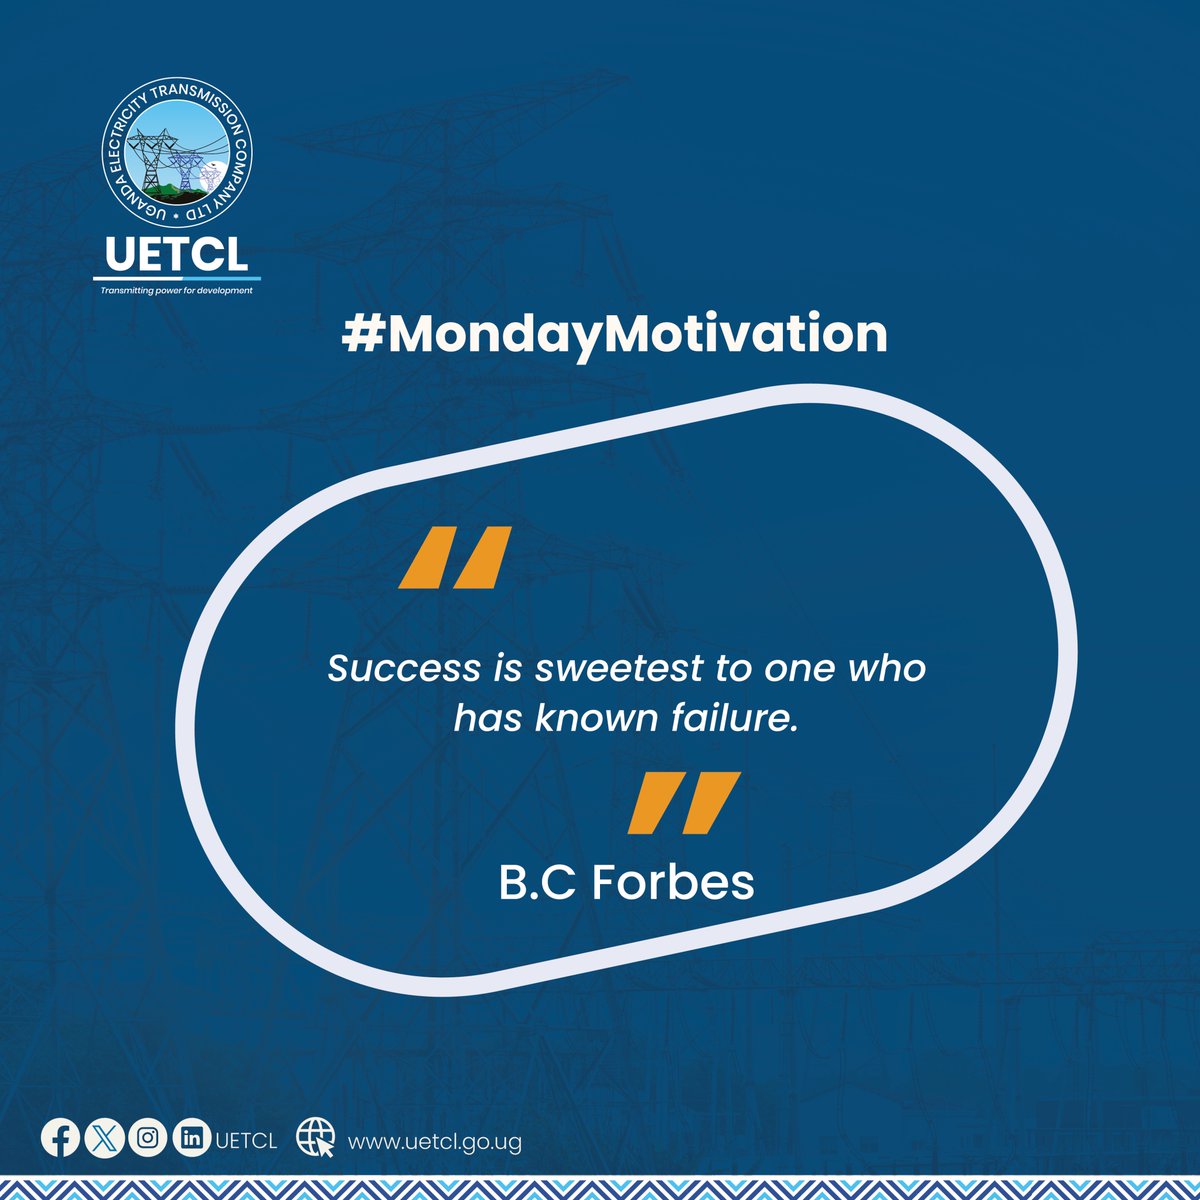 #MondayMotivation: Embrace failure, learn from it, and keep pushing forward. Happy new week!